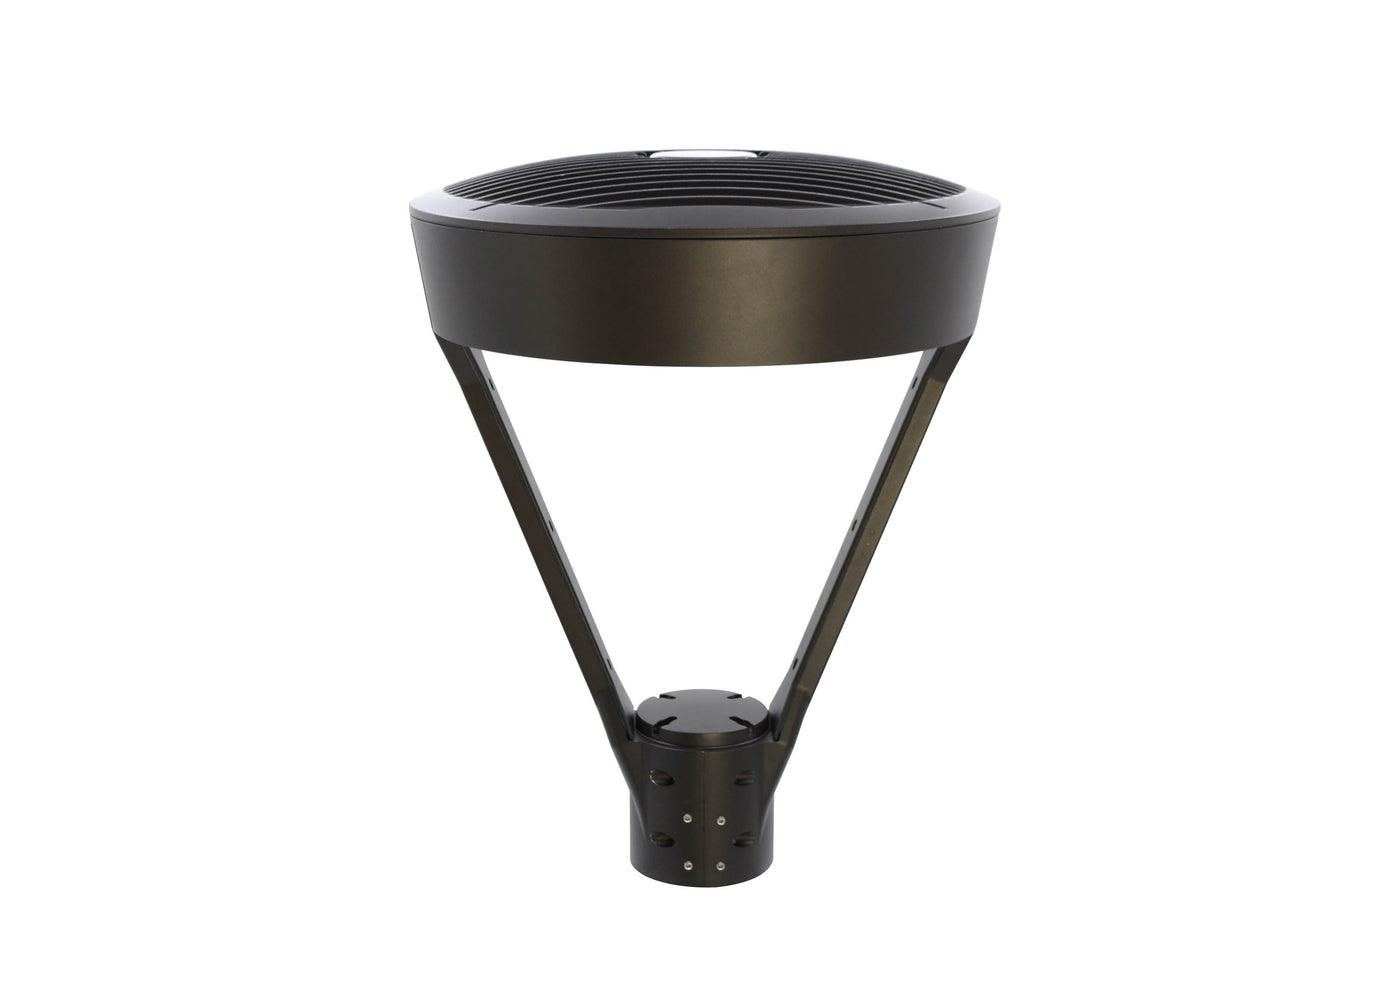 LED Post Top Light, 10400 Lumen Max, Wattage and CCT Selectable, Integrated Photocell, 120-277V